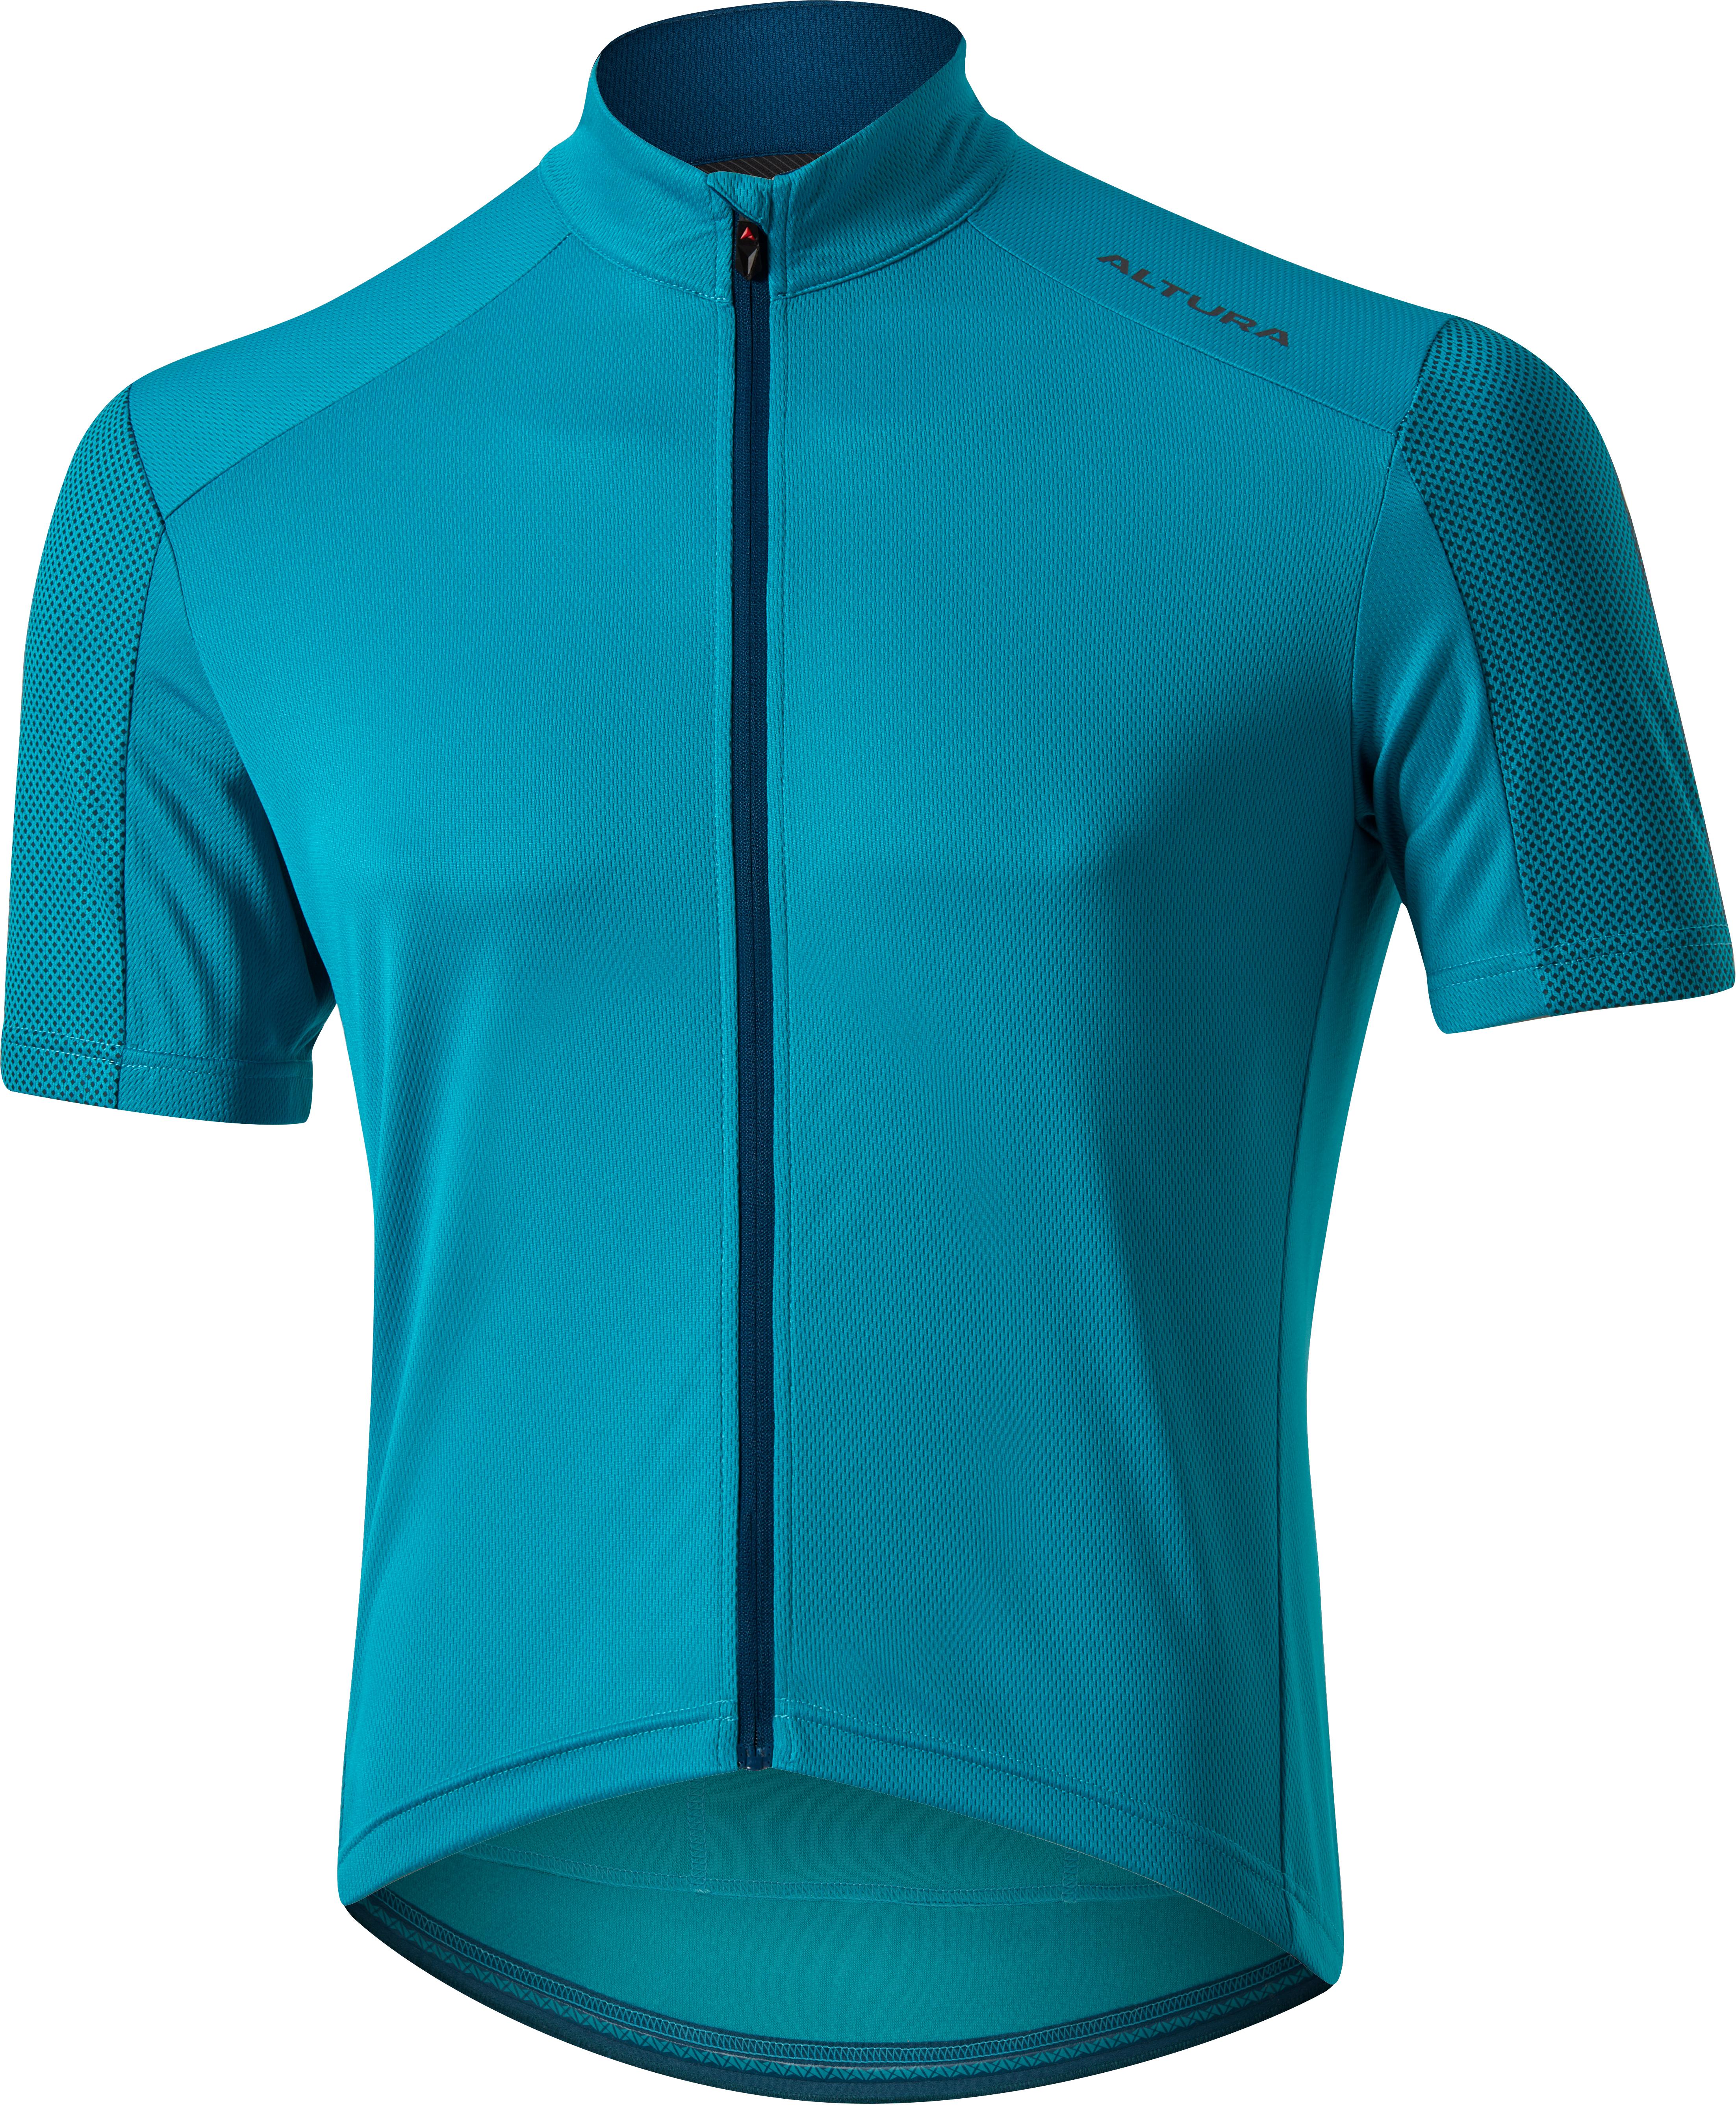 Altura Nightvision Short Sleeve Jersey - Caneel Bay - X Large